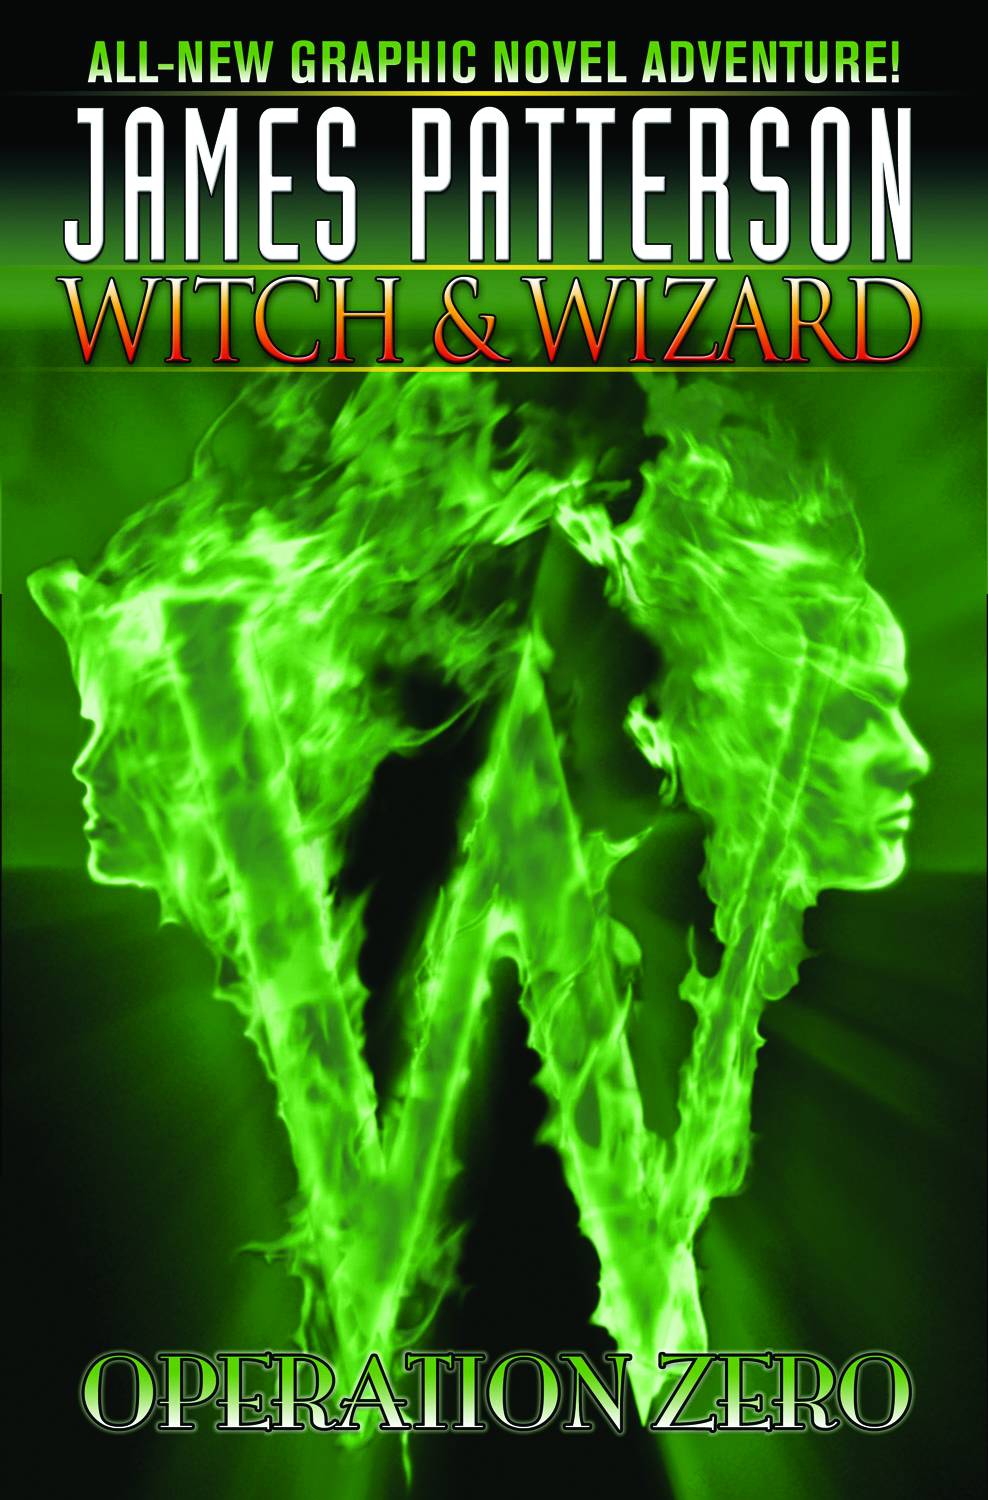 James Pattersons Witch & Wizard Hardcover Volume 2 Operation Zero